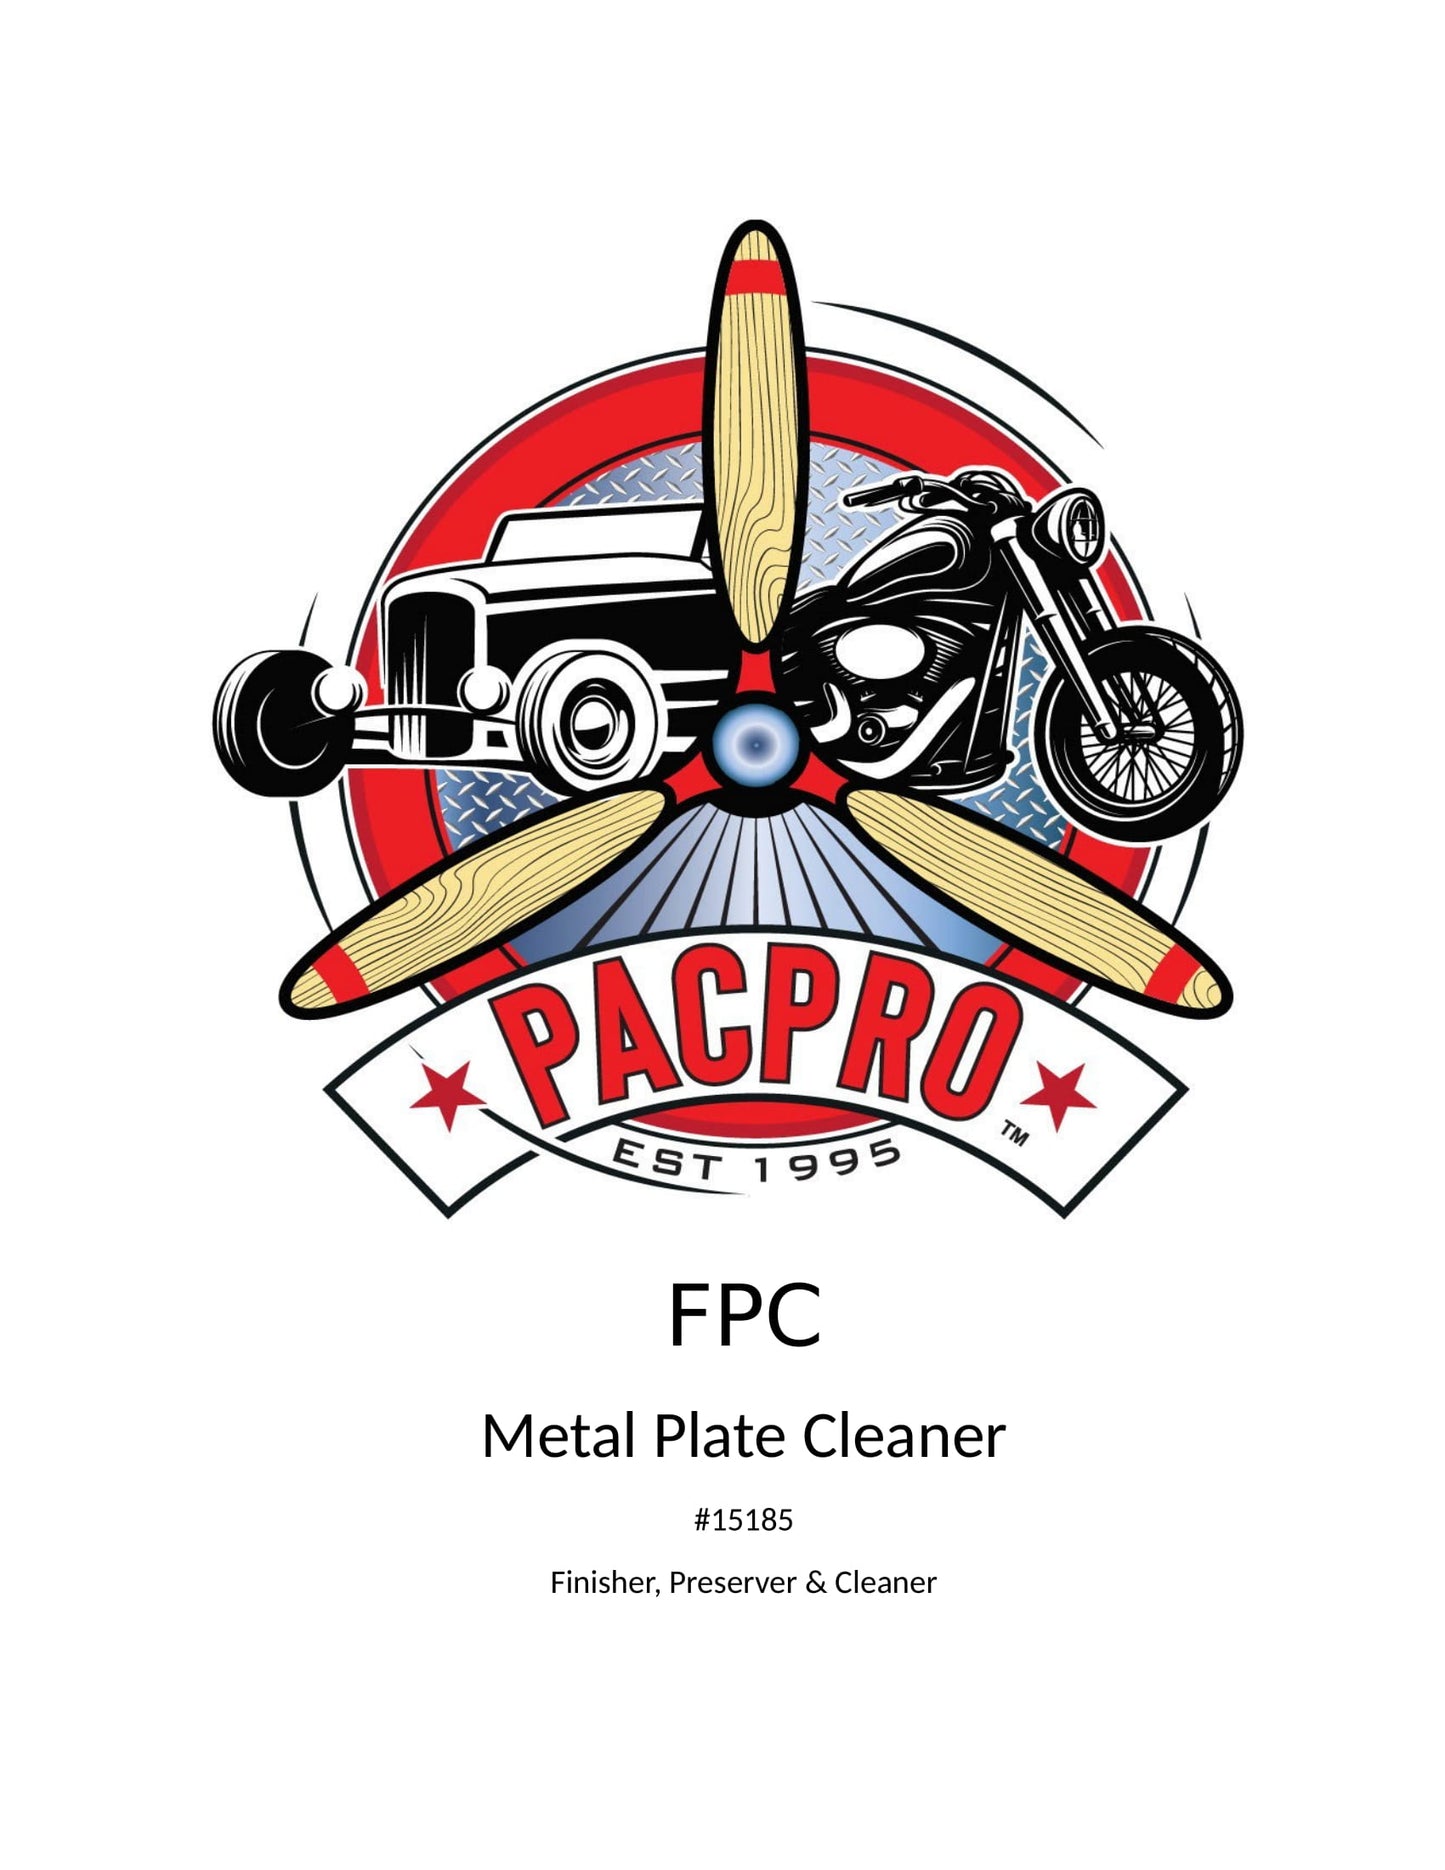 FPC Metal Plate Cleaner